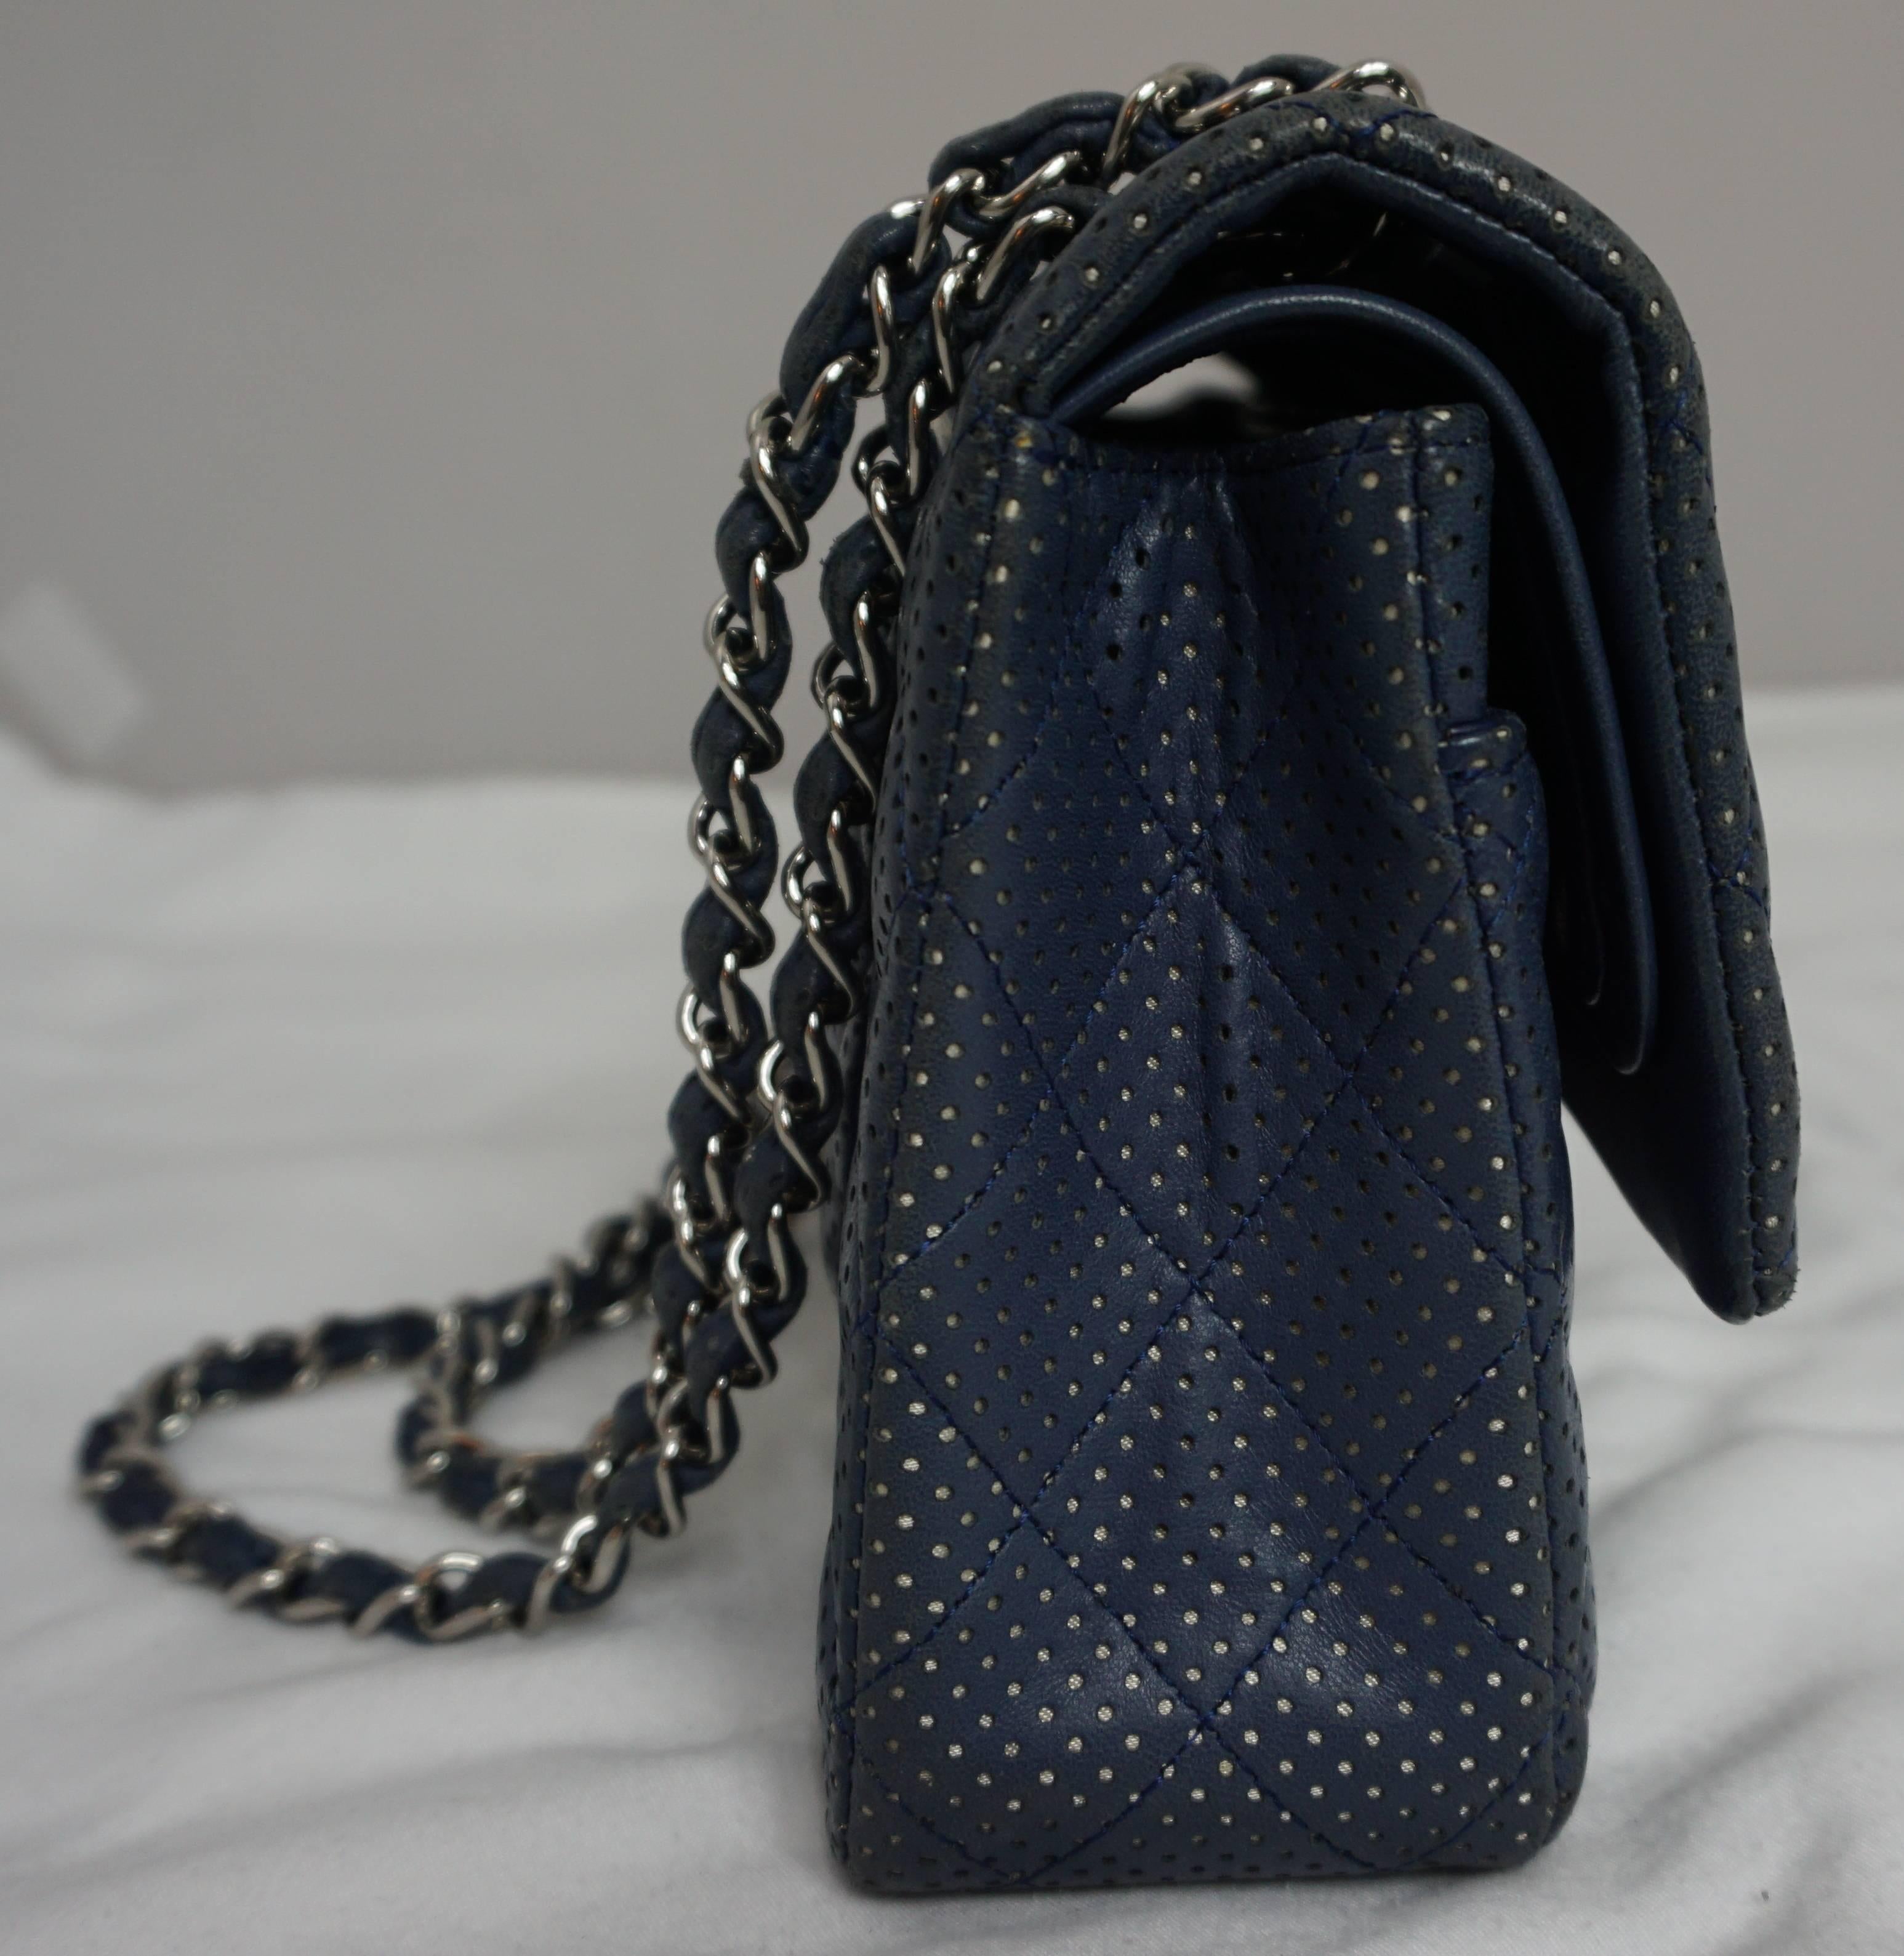 Chanel Blue/Silver Perforated Leather Medium Double Flap Handbag-SHW-2006 This beautiful and unique combination is a light navy blue perforated leather with silver coming through the perforations, It is a medium double flap and has SHW and the